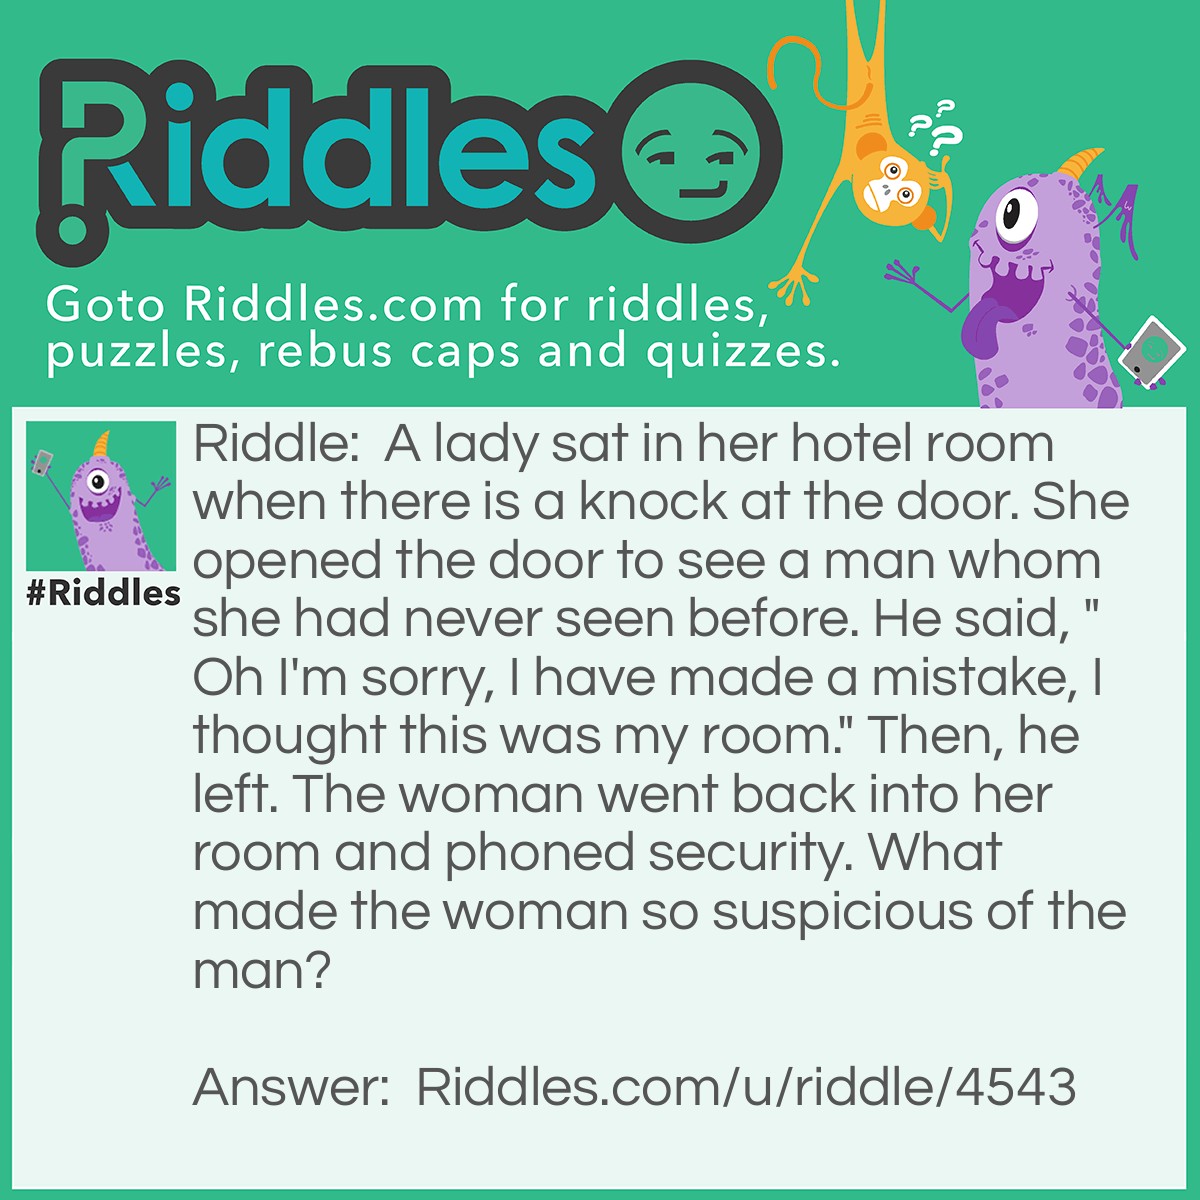 Riddle: A lady sat in her hotel room when there is a knock at the door. She opened the door to see a man whom she had never seen before. He said, "Oh I'm sorry, I have made a mistake, I thought this was my room." Then, he left. The woman went back into her room and phoned security. What made the woman so suspicious of the man? Answer: You don't knock on your own hotel room.